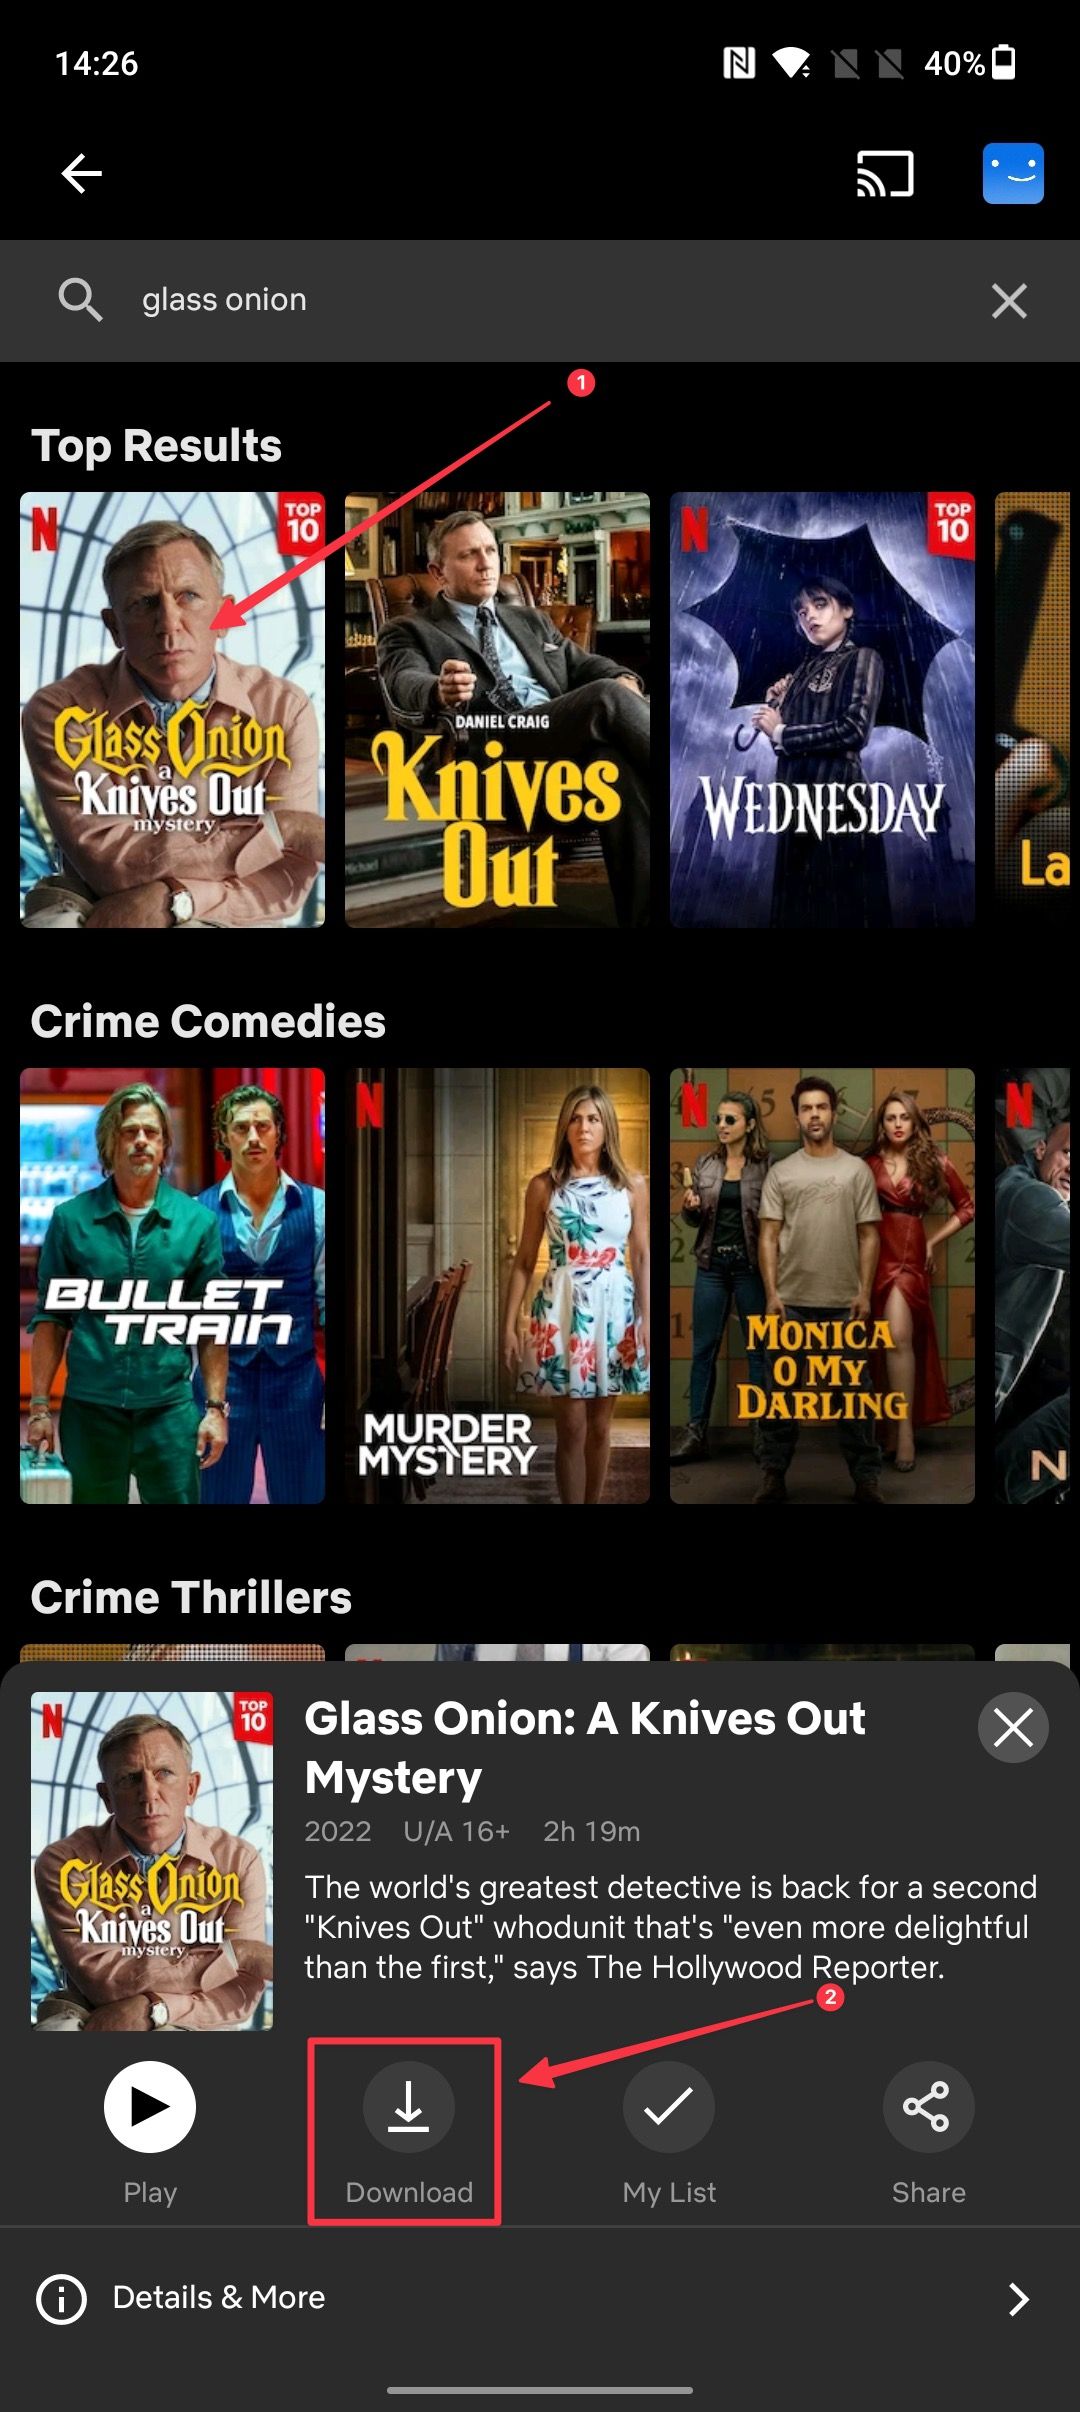 Download movies from Netflix on Android 4